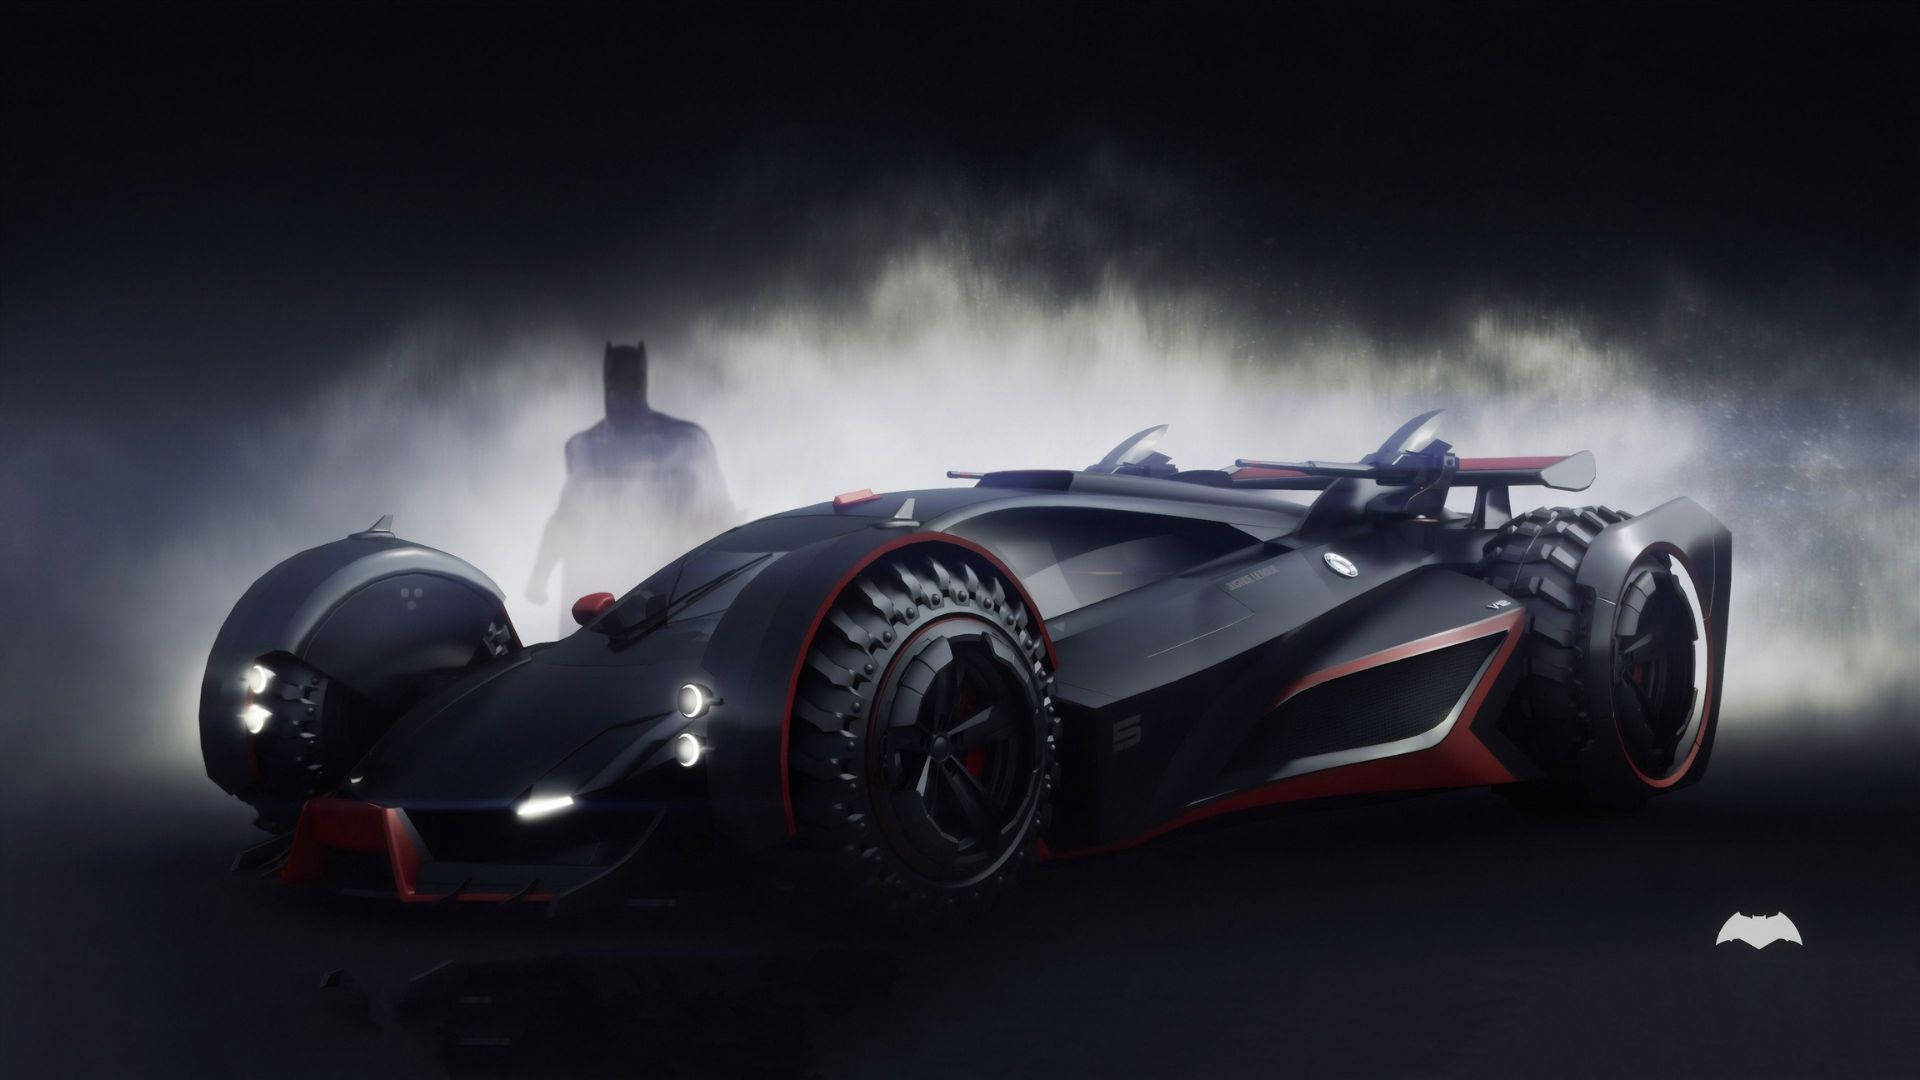 Batmobile In The Foggy Place Background